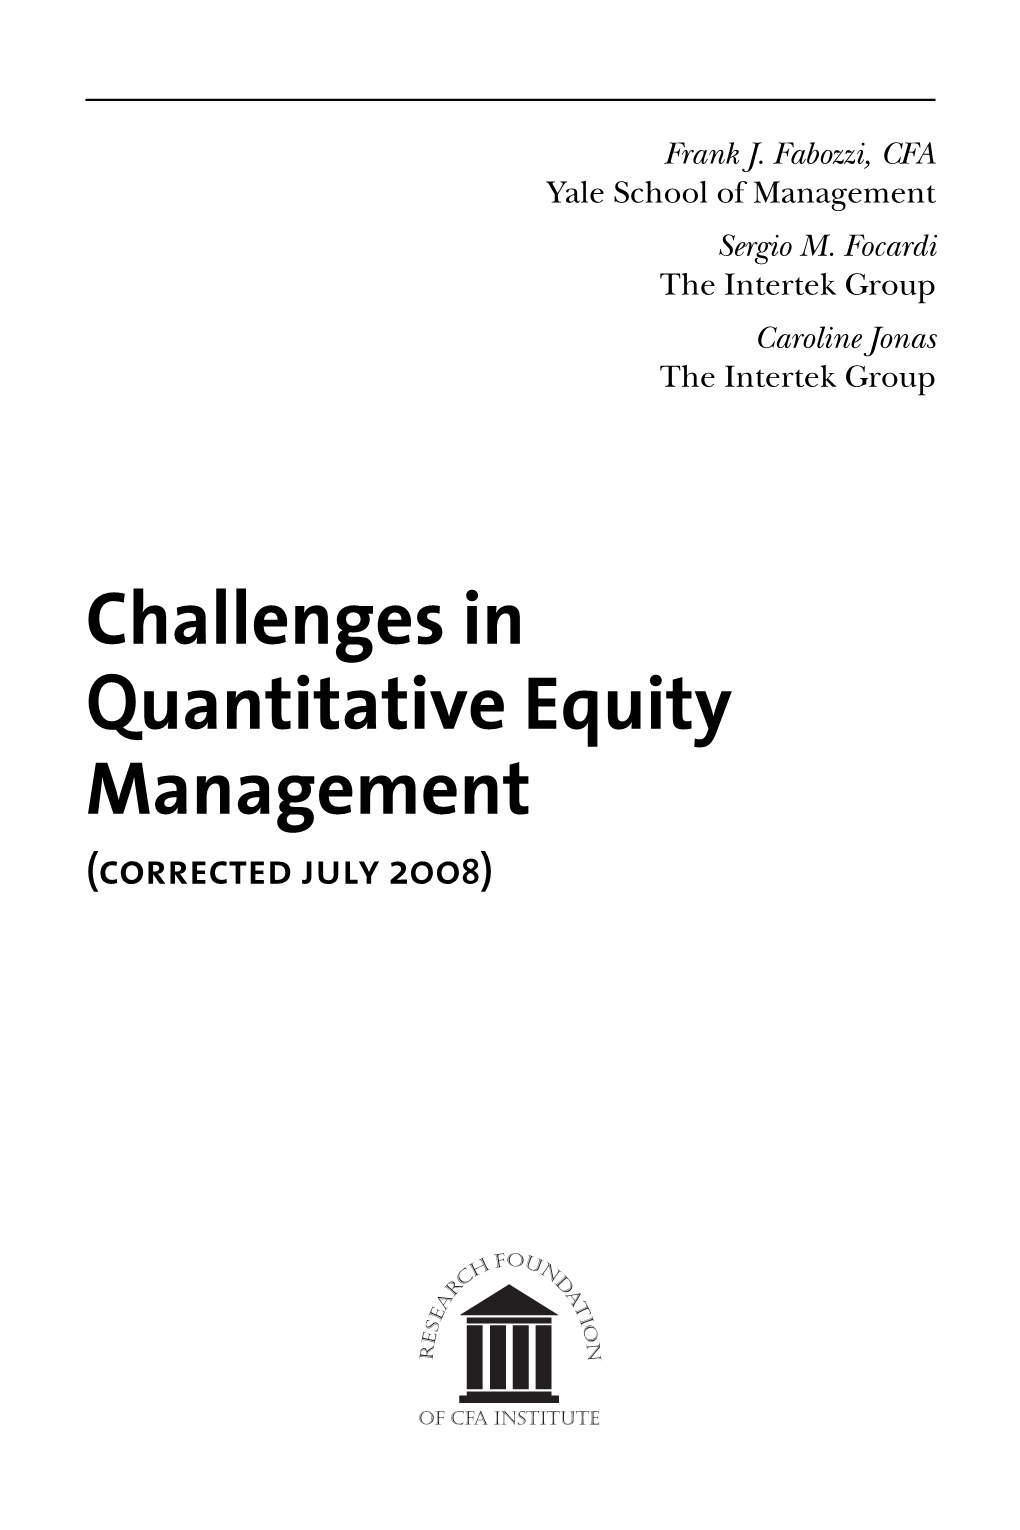 Challenges in Quantitative Equity Management (Corrected July 2008)